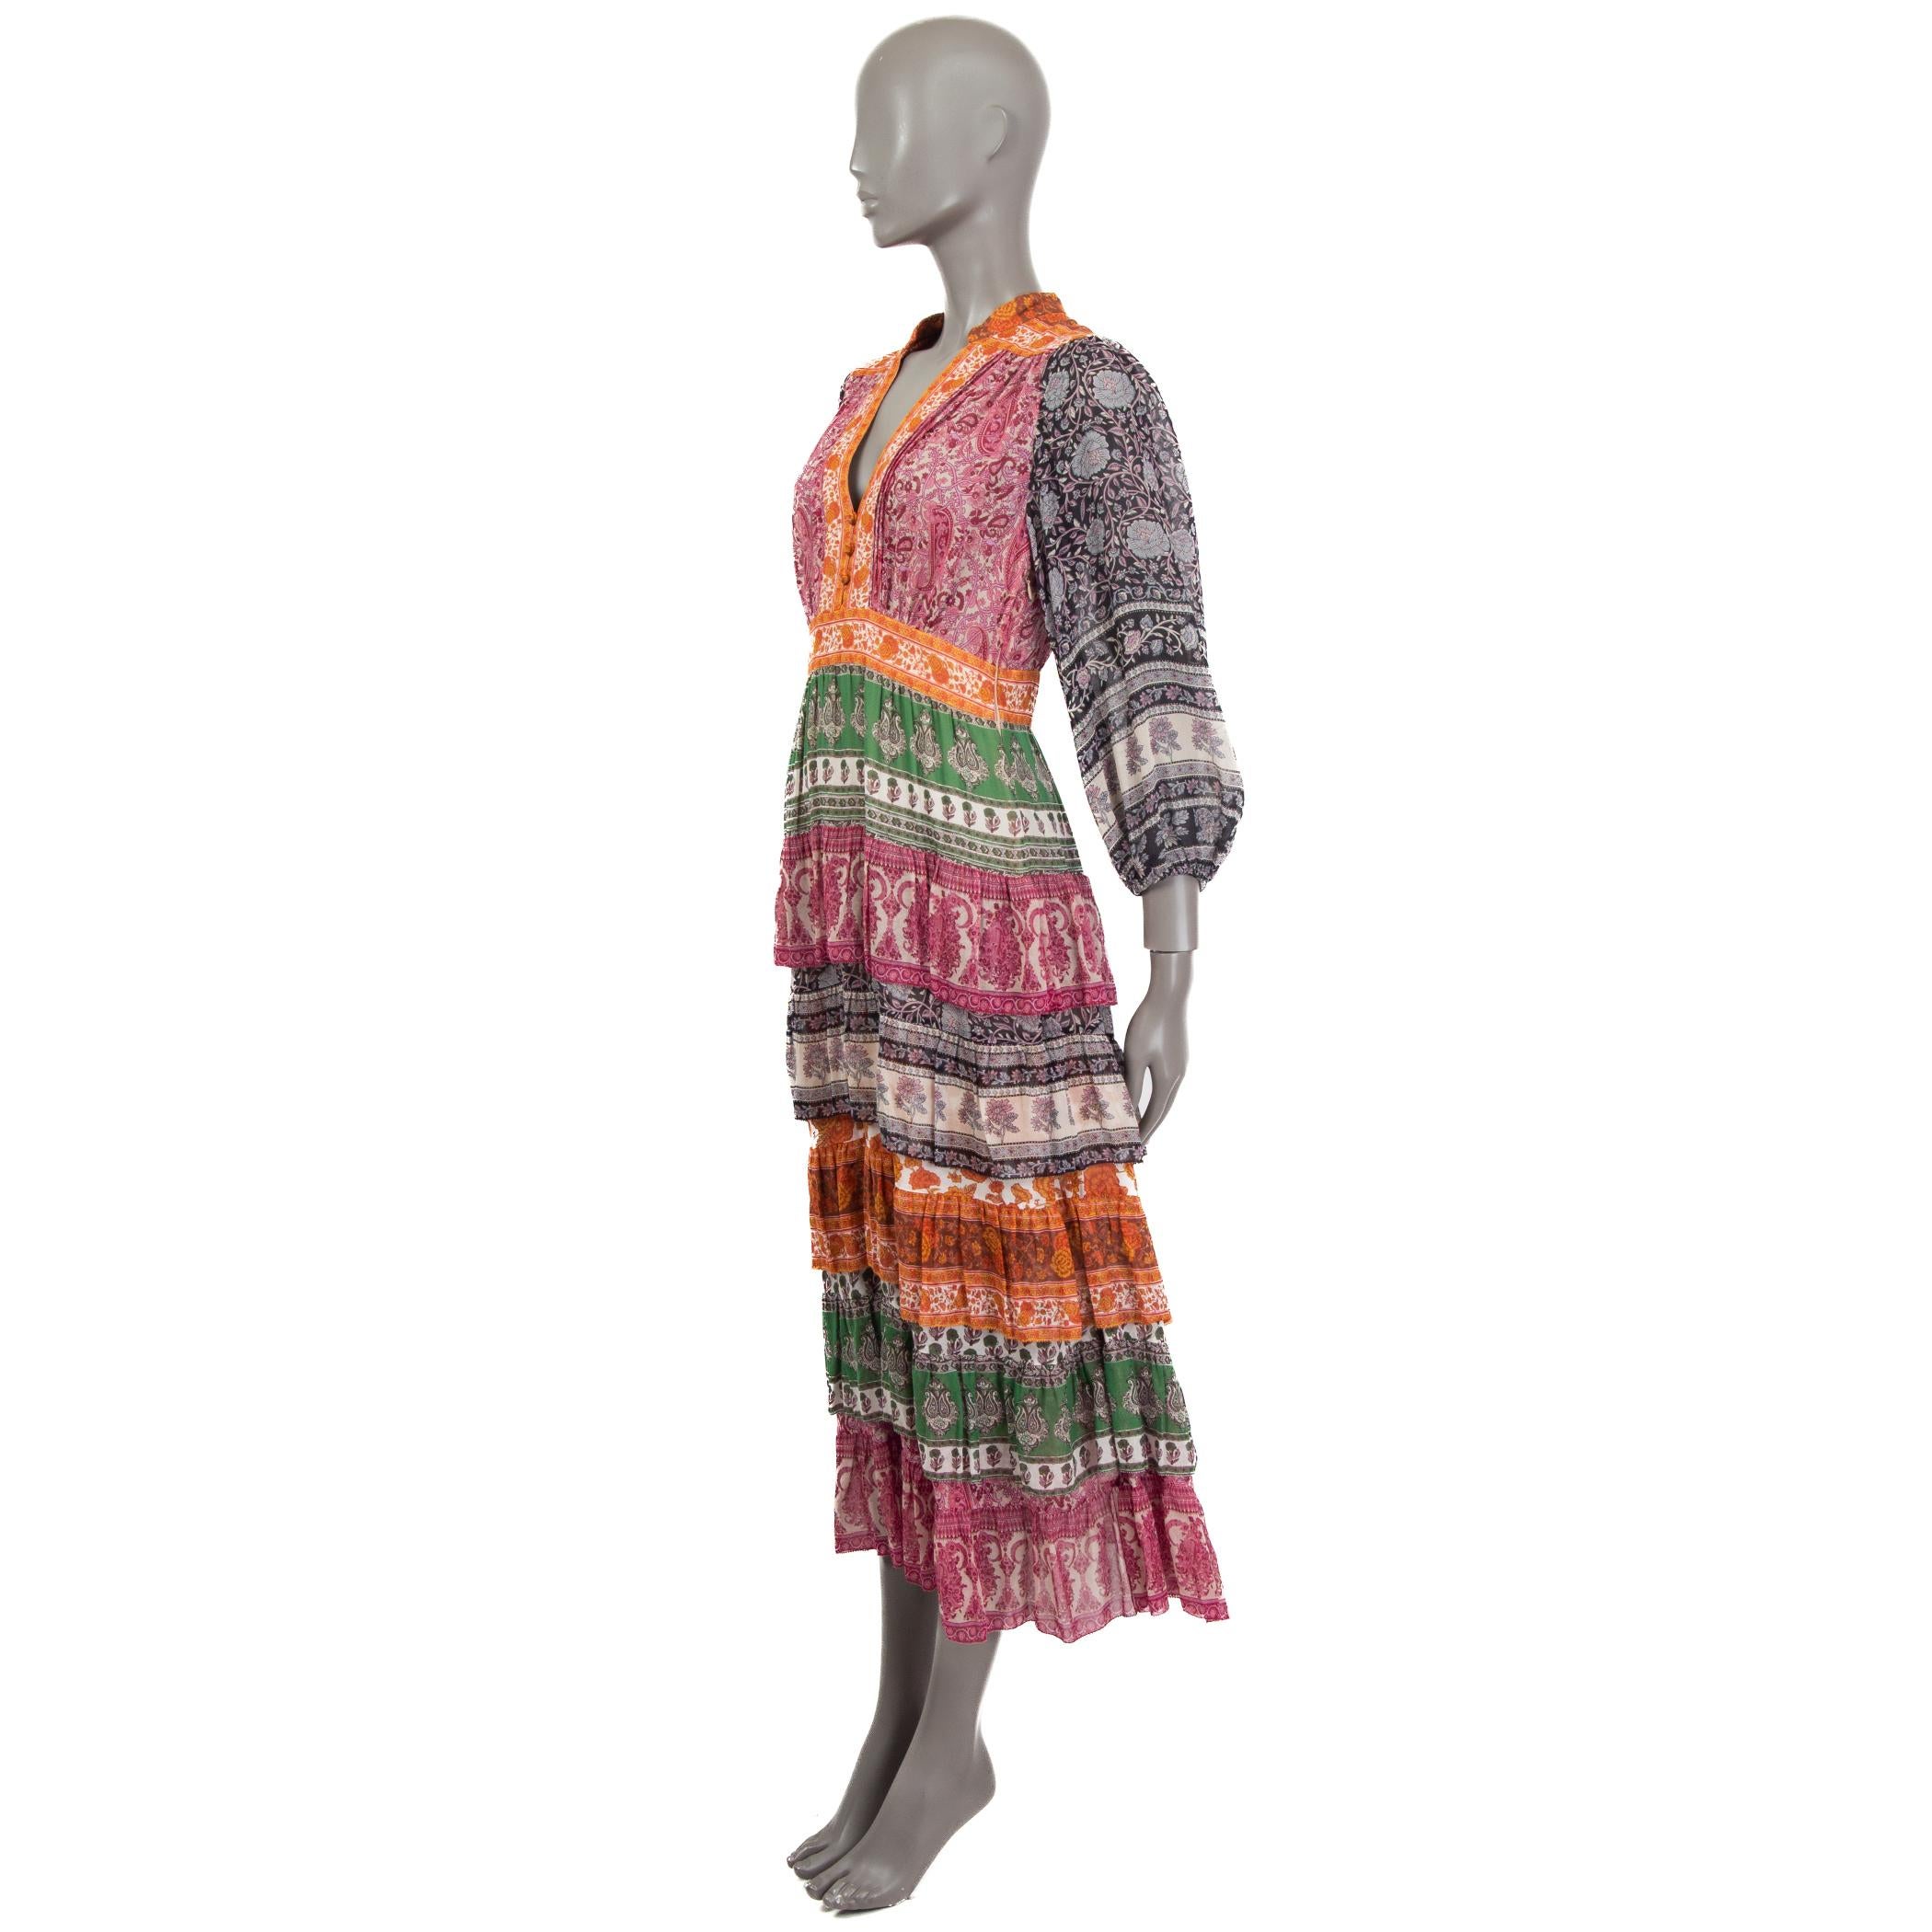 100% authentic Zimmermann Amari tiered midi dress in orange, black, purple, green and beige cotton (76%) and silk (24%) voile. Features 3/4 sleeves and a paisley & floral print. Opens with three buttons at the front and a concealed zipper at the